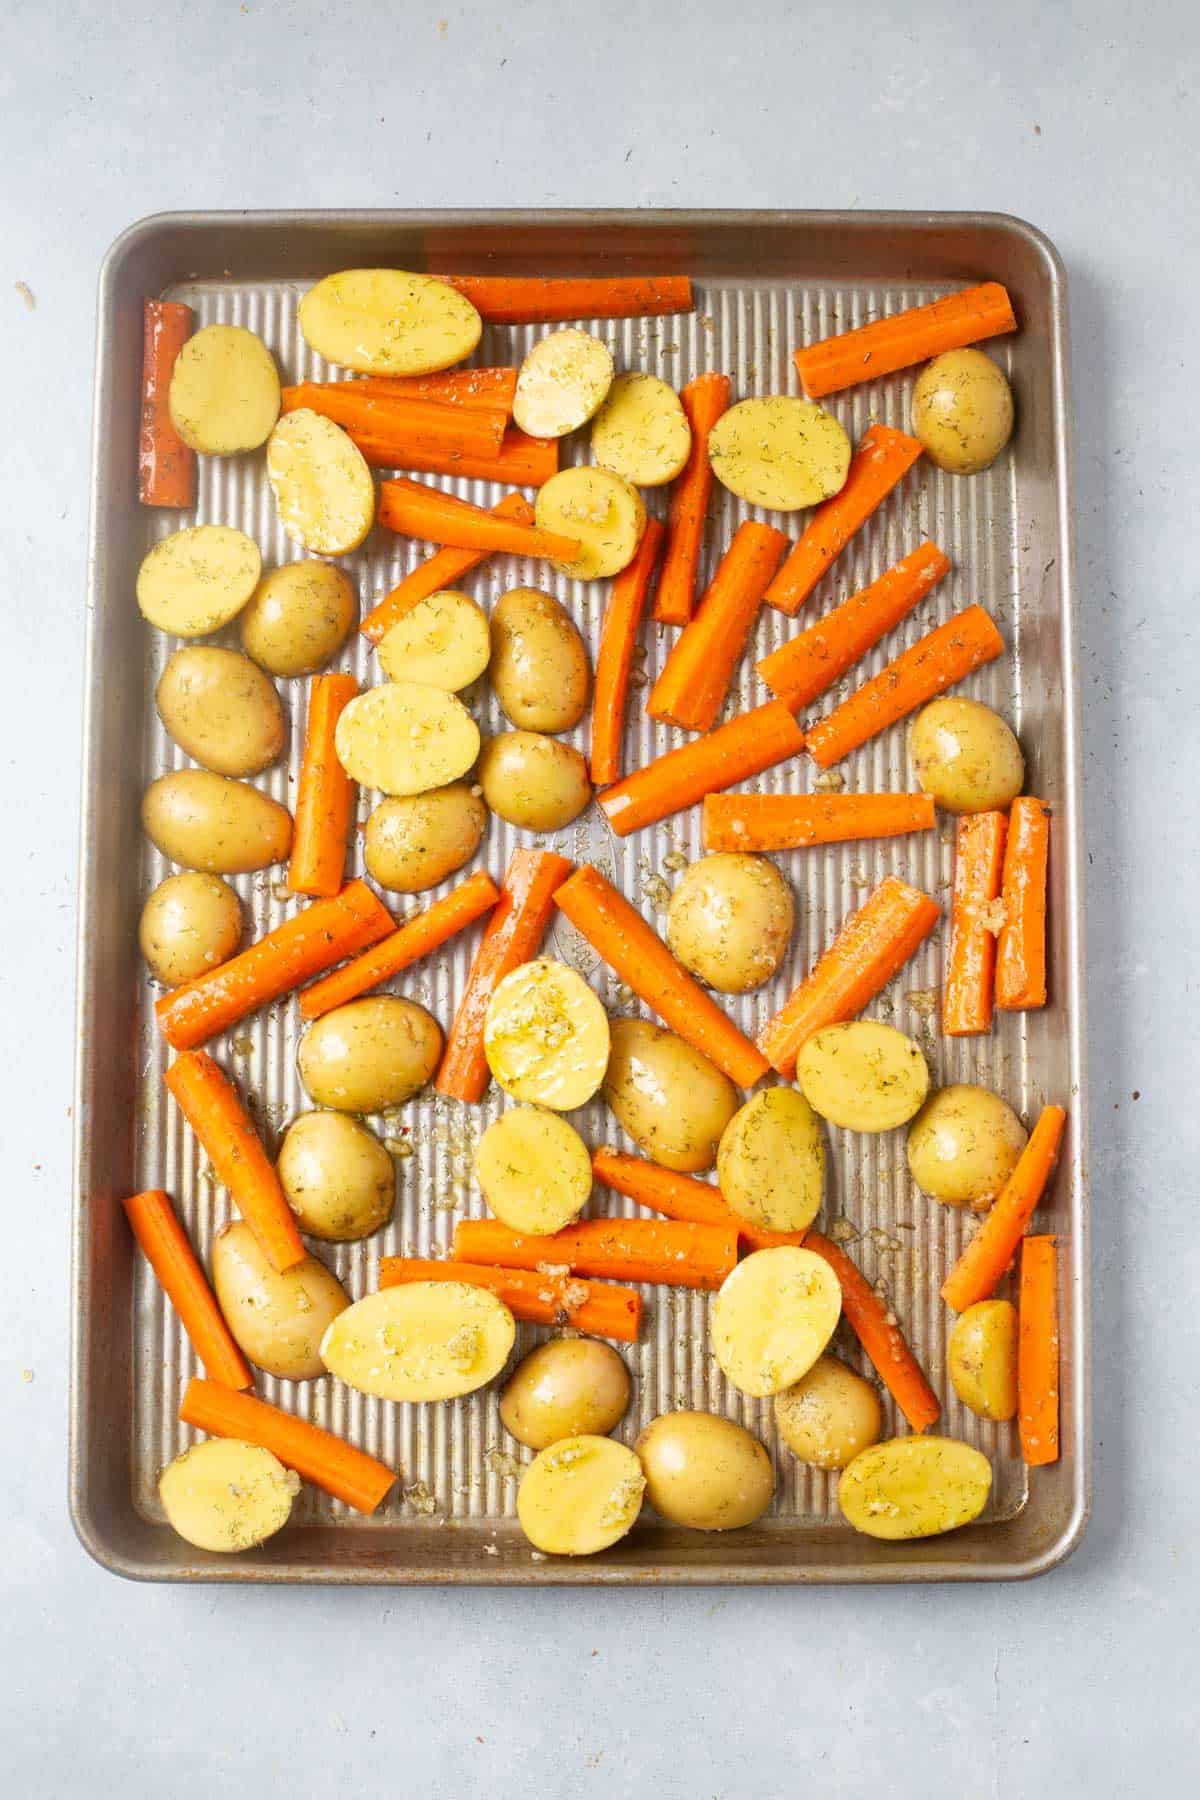 potatoes and carrots on a sheet pan